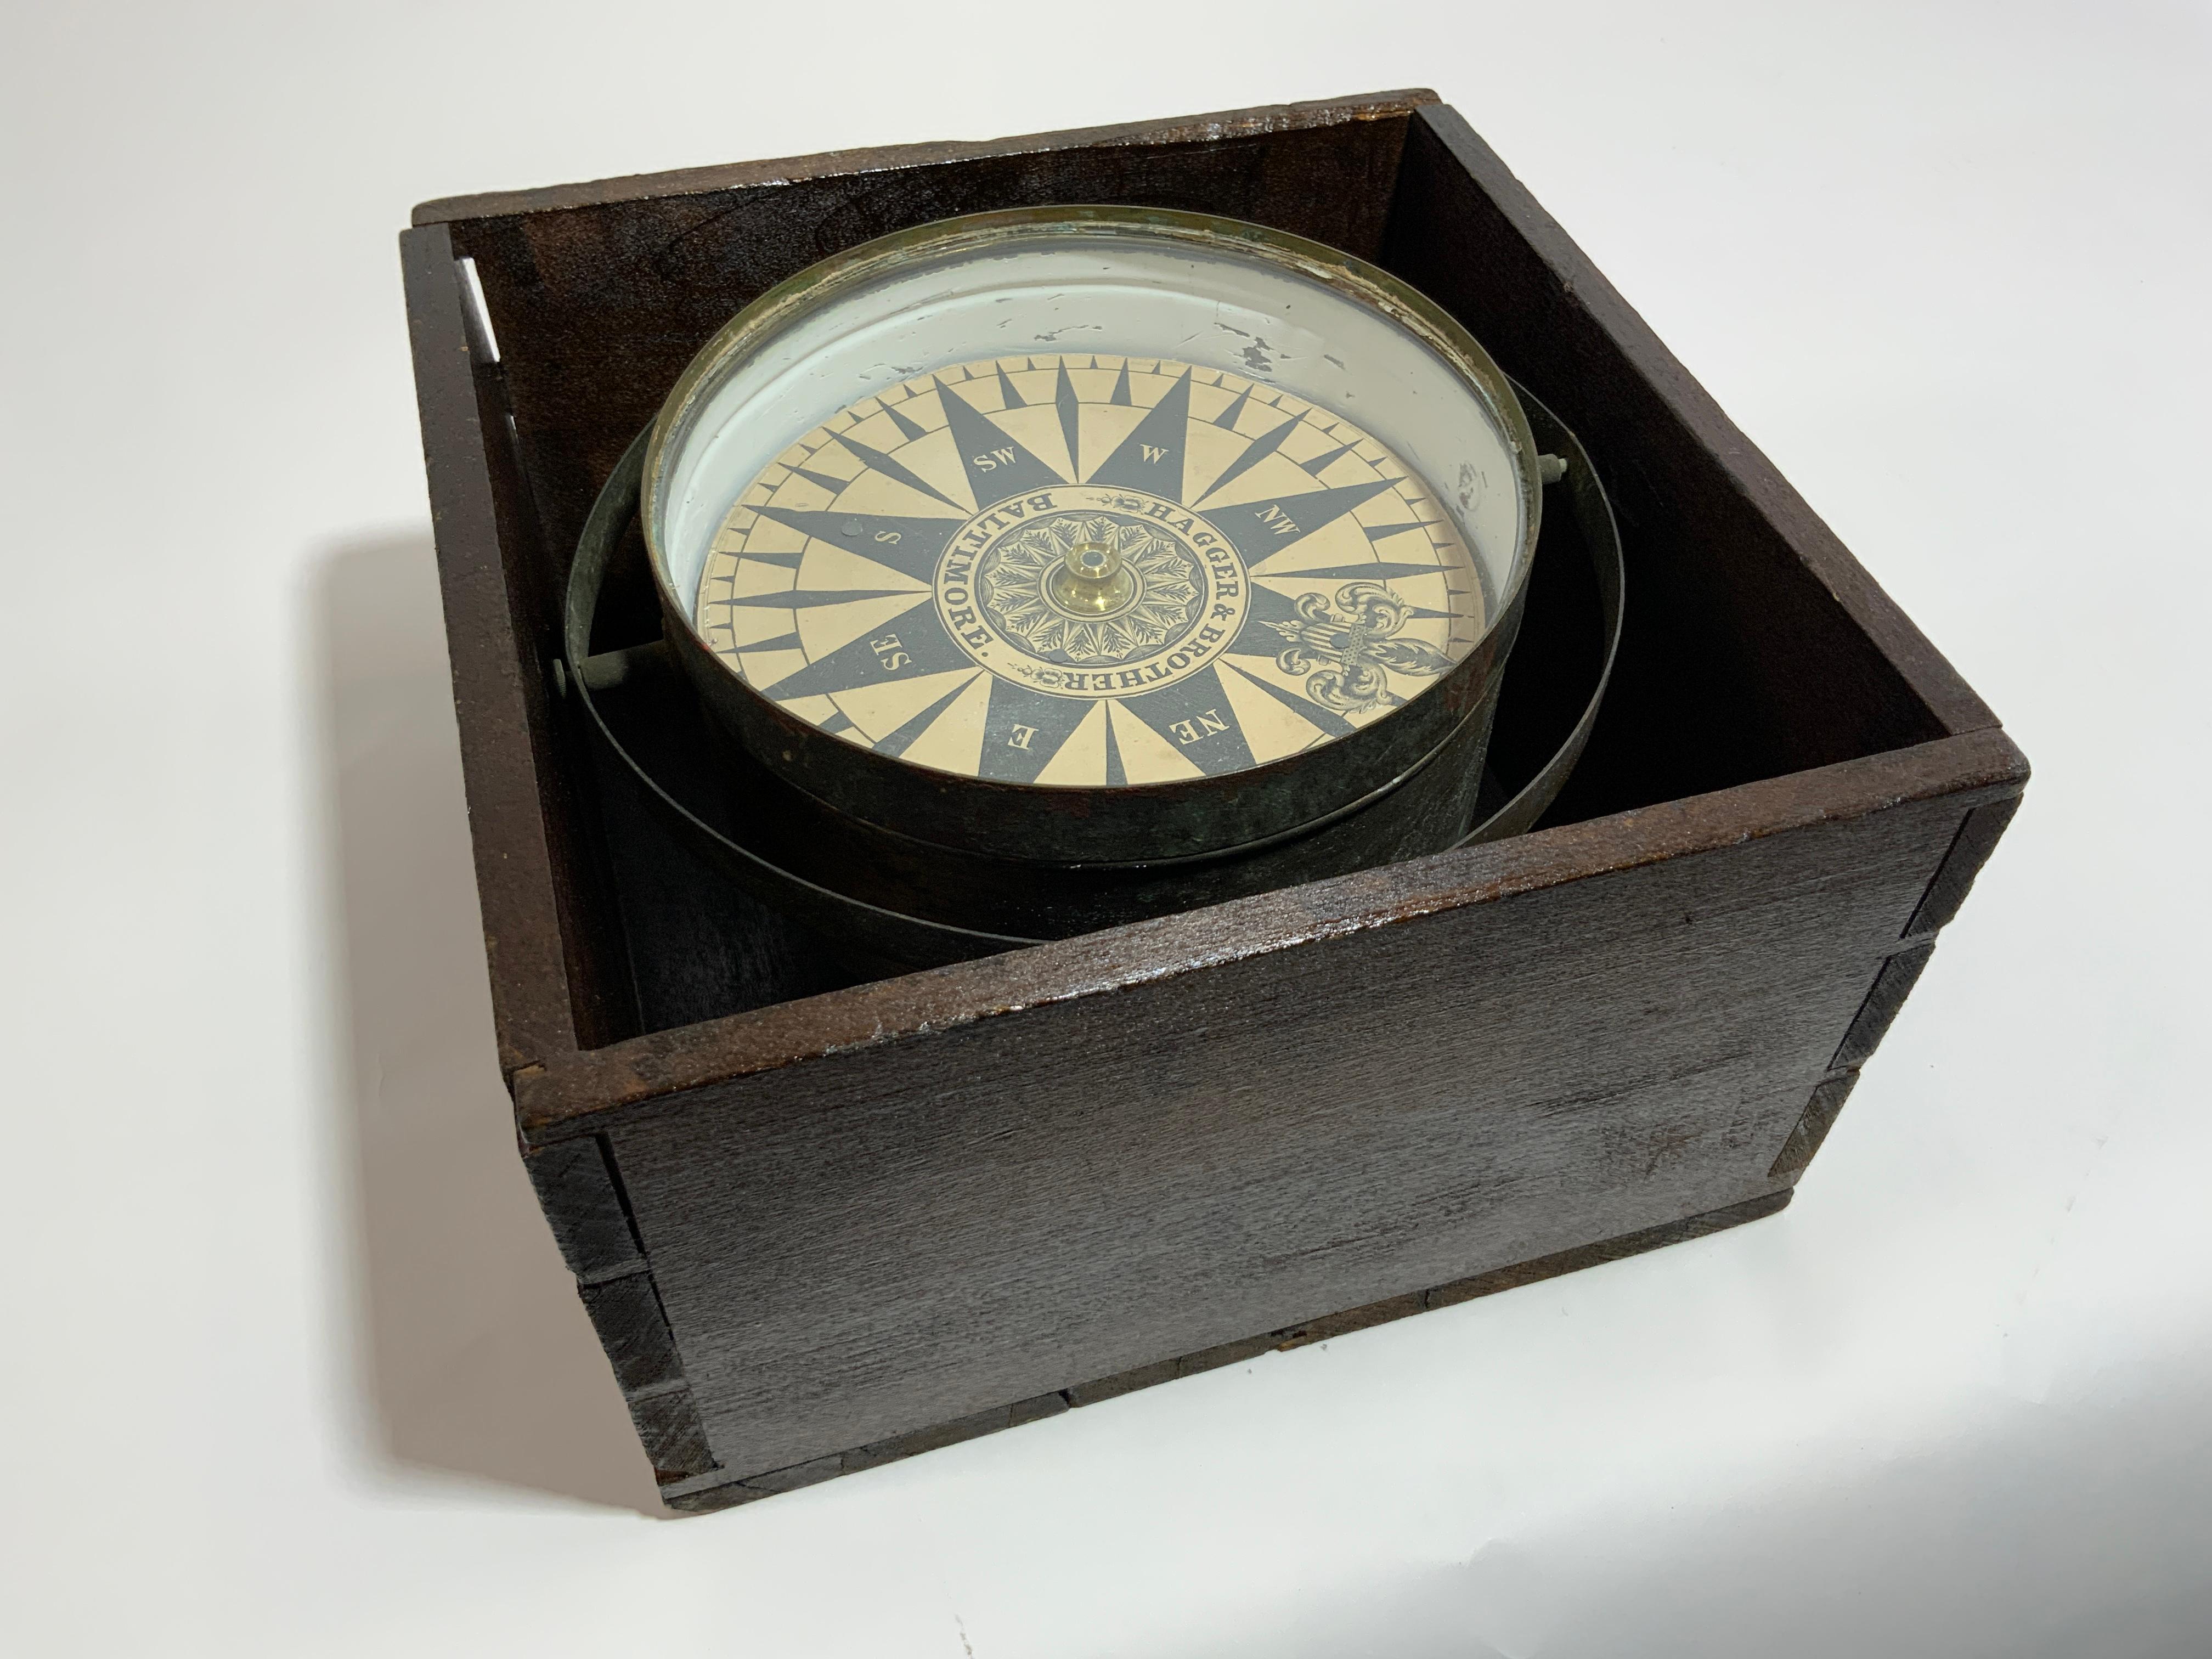 Nineteenth century ships compass by Hagger & Brother of Baltimore, Maryland. Seven inch brass bowl with gimbal. Very fine compass card marked with a large fleur-de-lis pointing north. Working condition. Fitted to a timber box. Circa 1850.

Overall